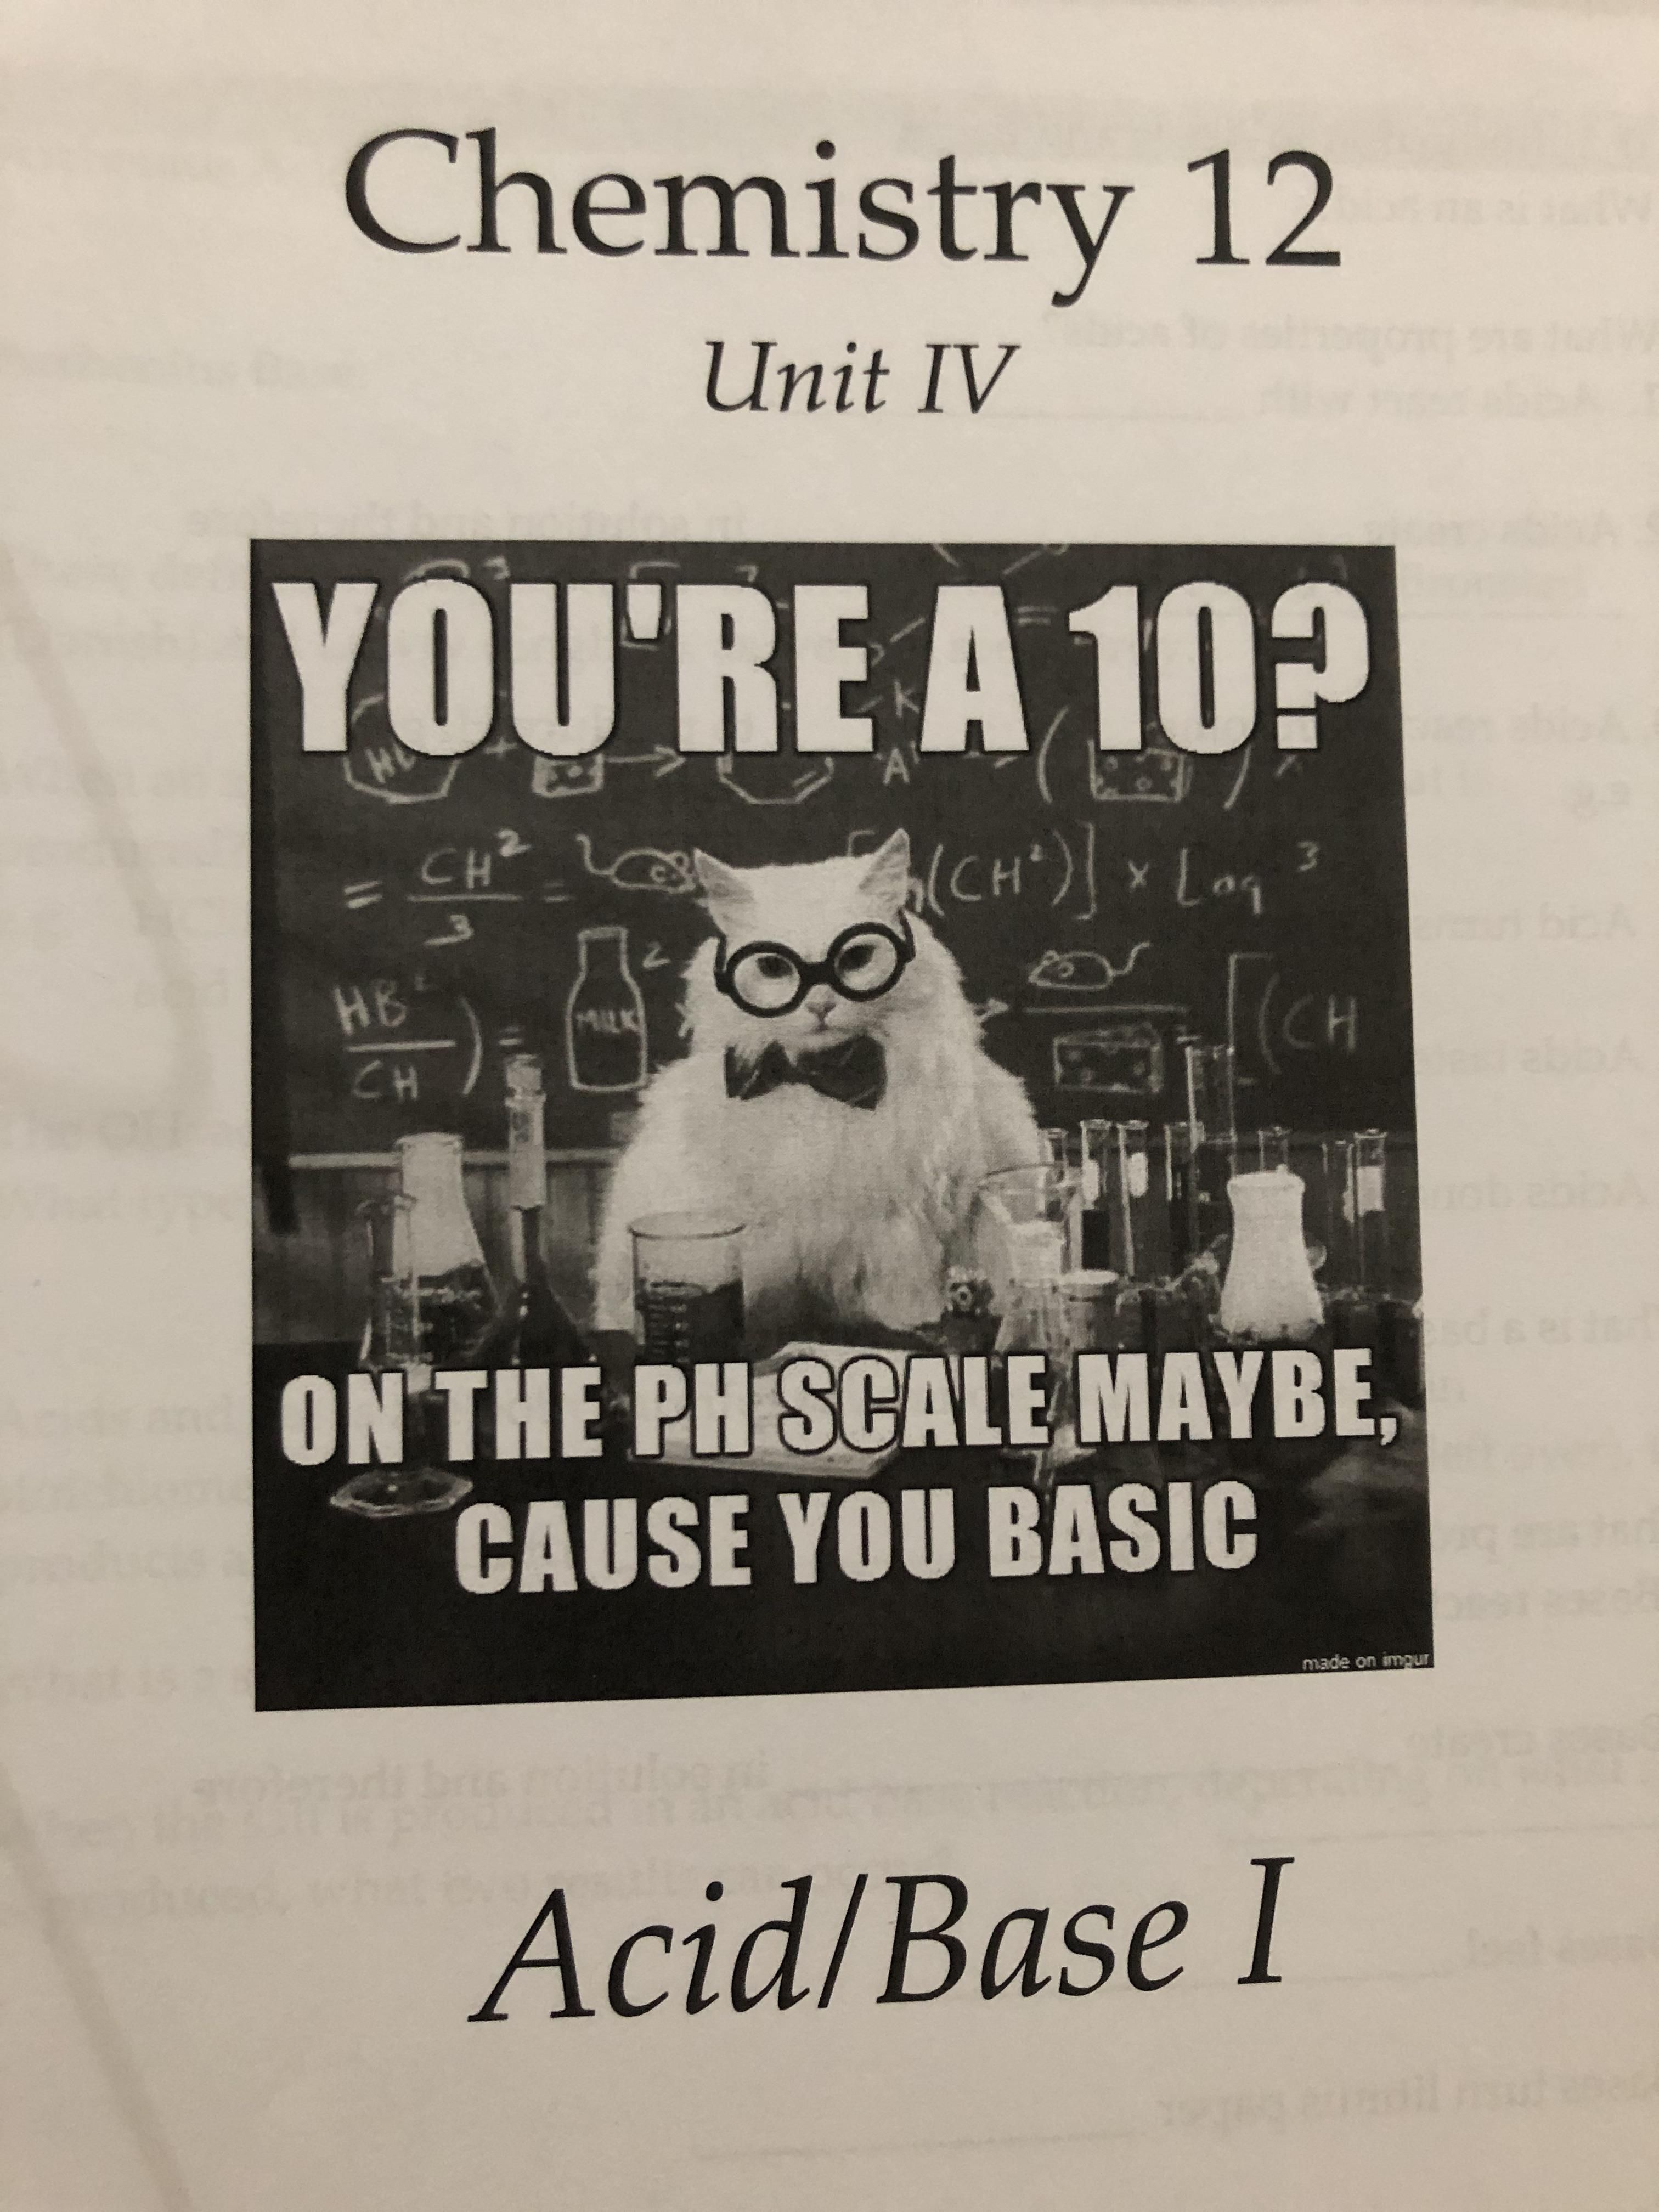 I just thought my teacher’s chemistry booklet would fit here